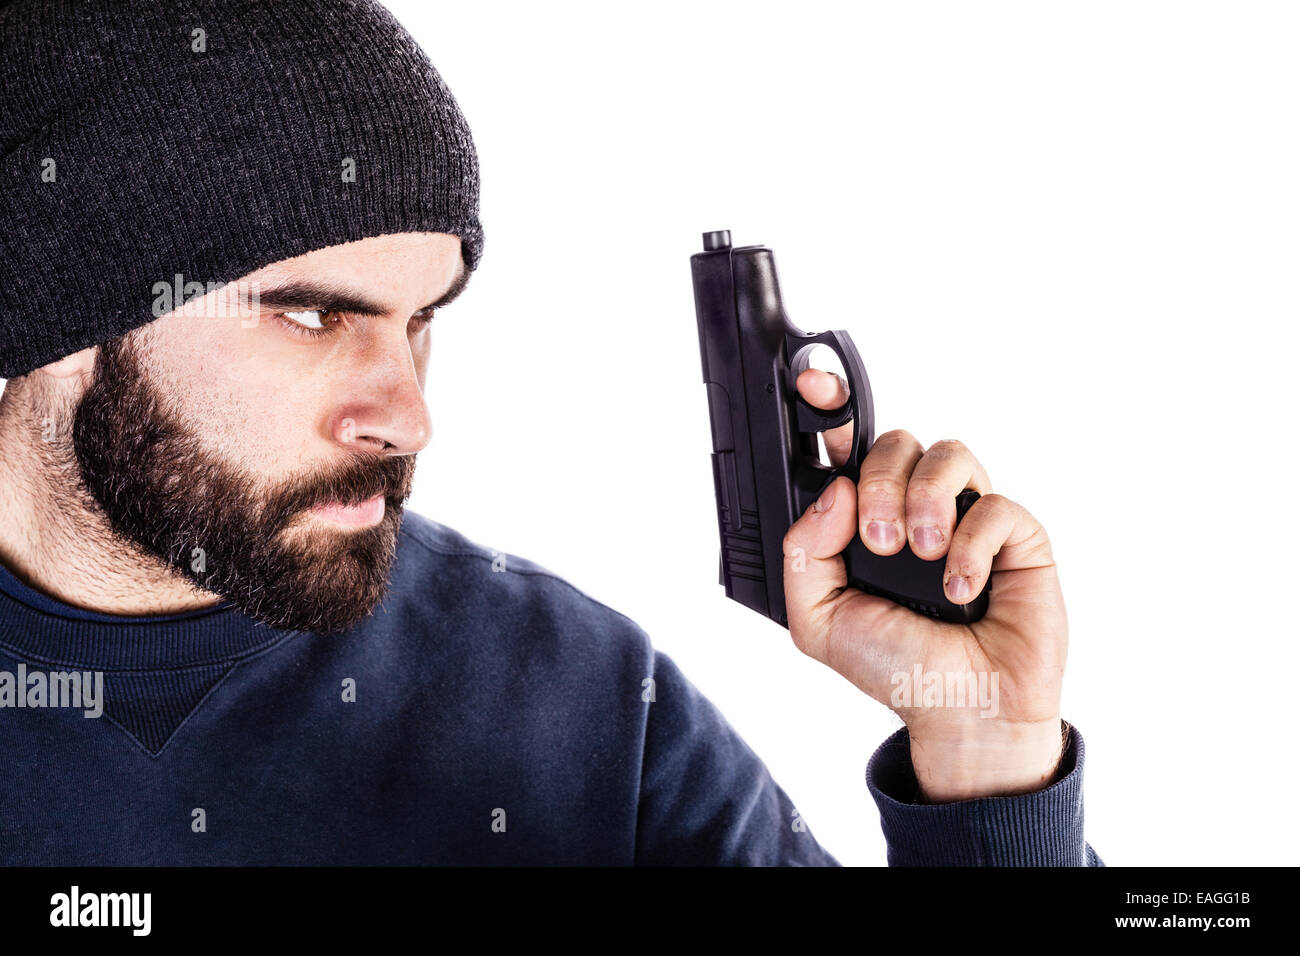 a bearded criminal or an undercover cop with a pistol and wearing a beanie hat isolated over white Stock Photo